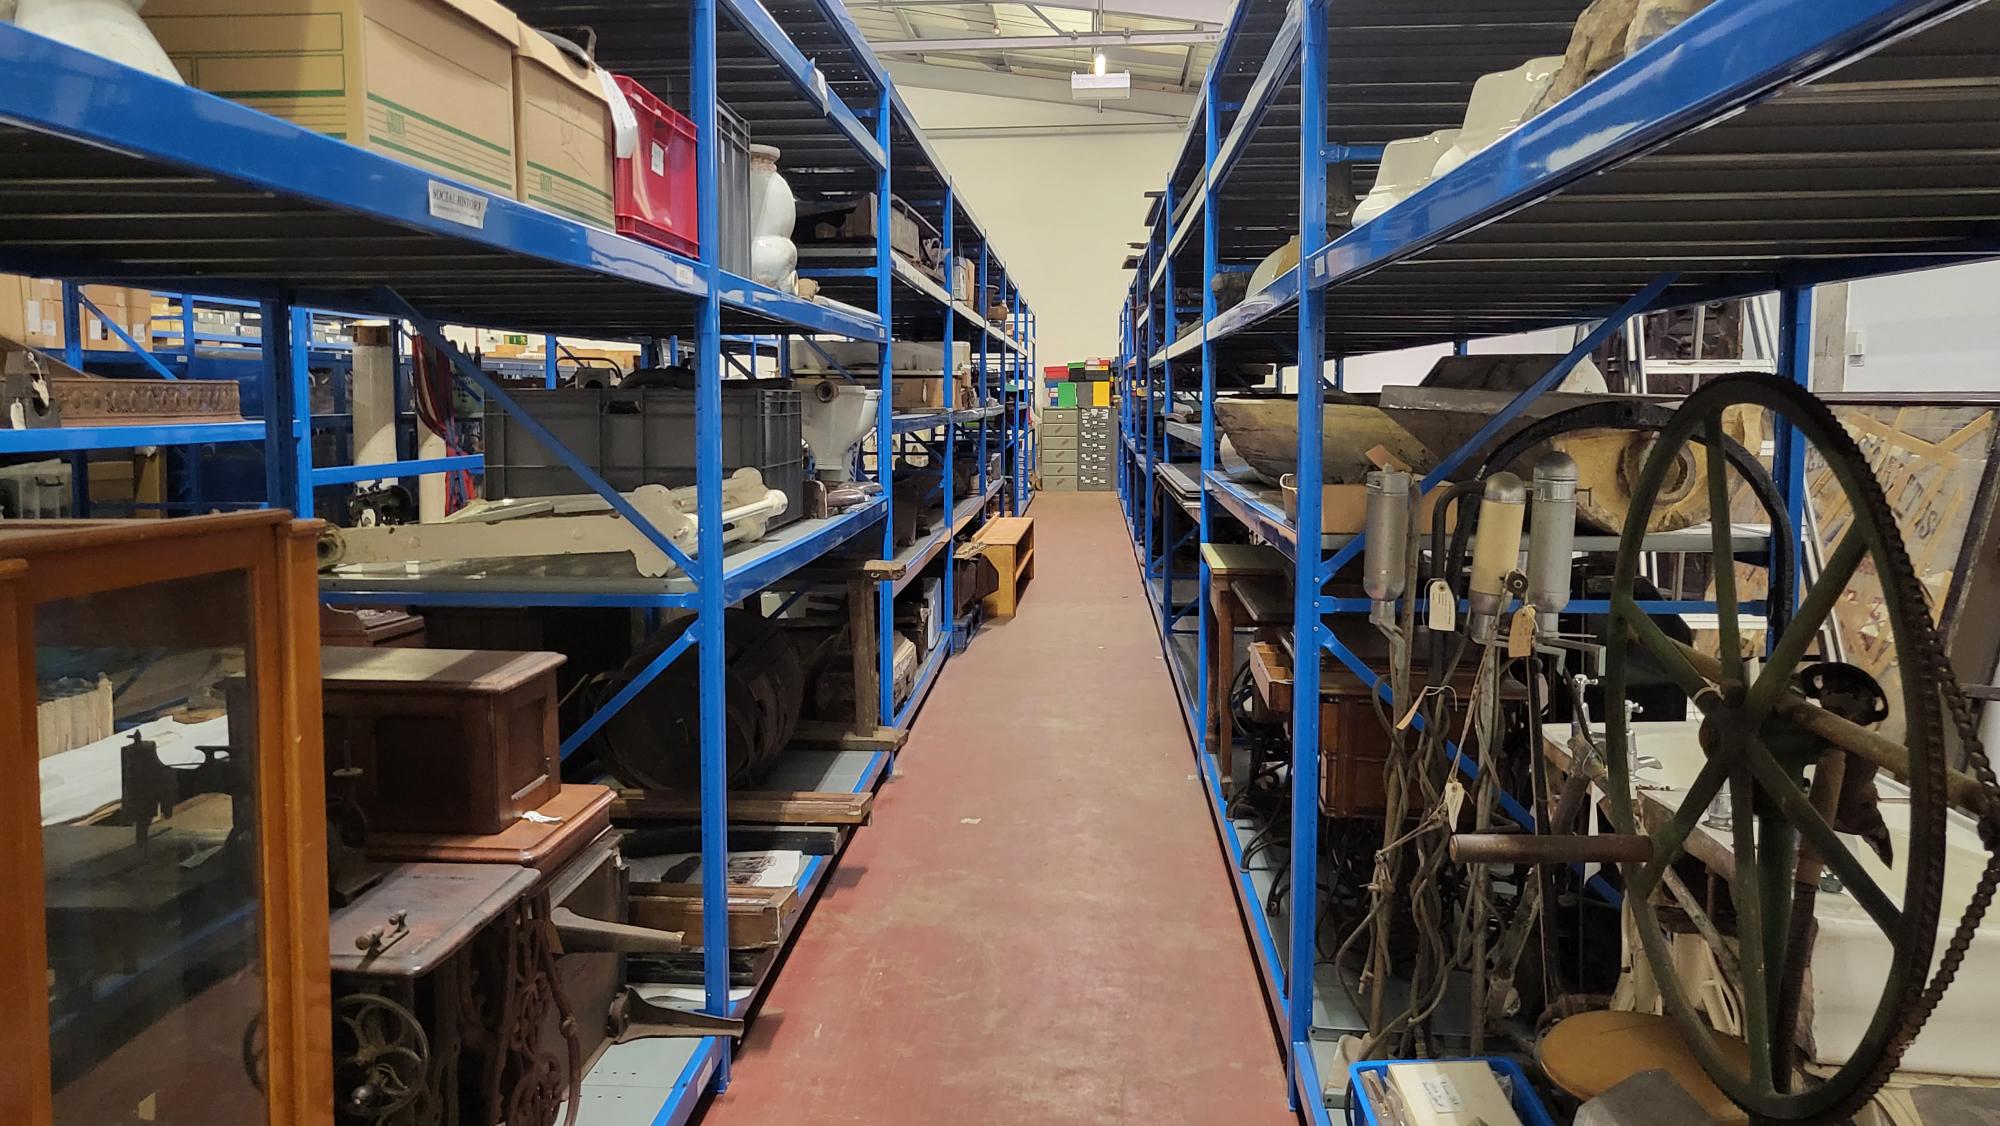 Leicester Museums Store Tours this Spring